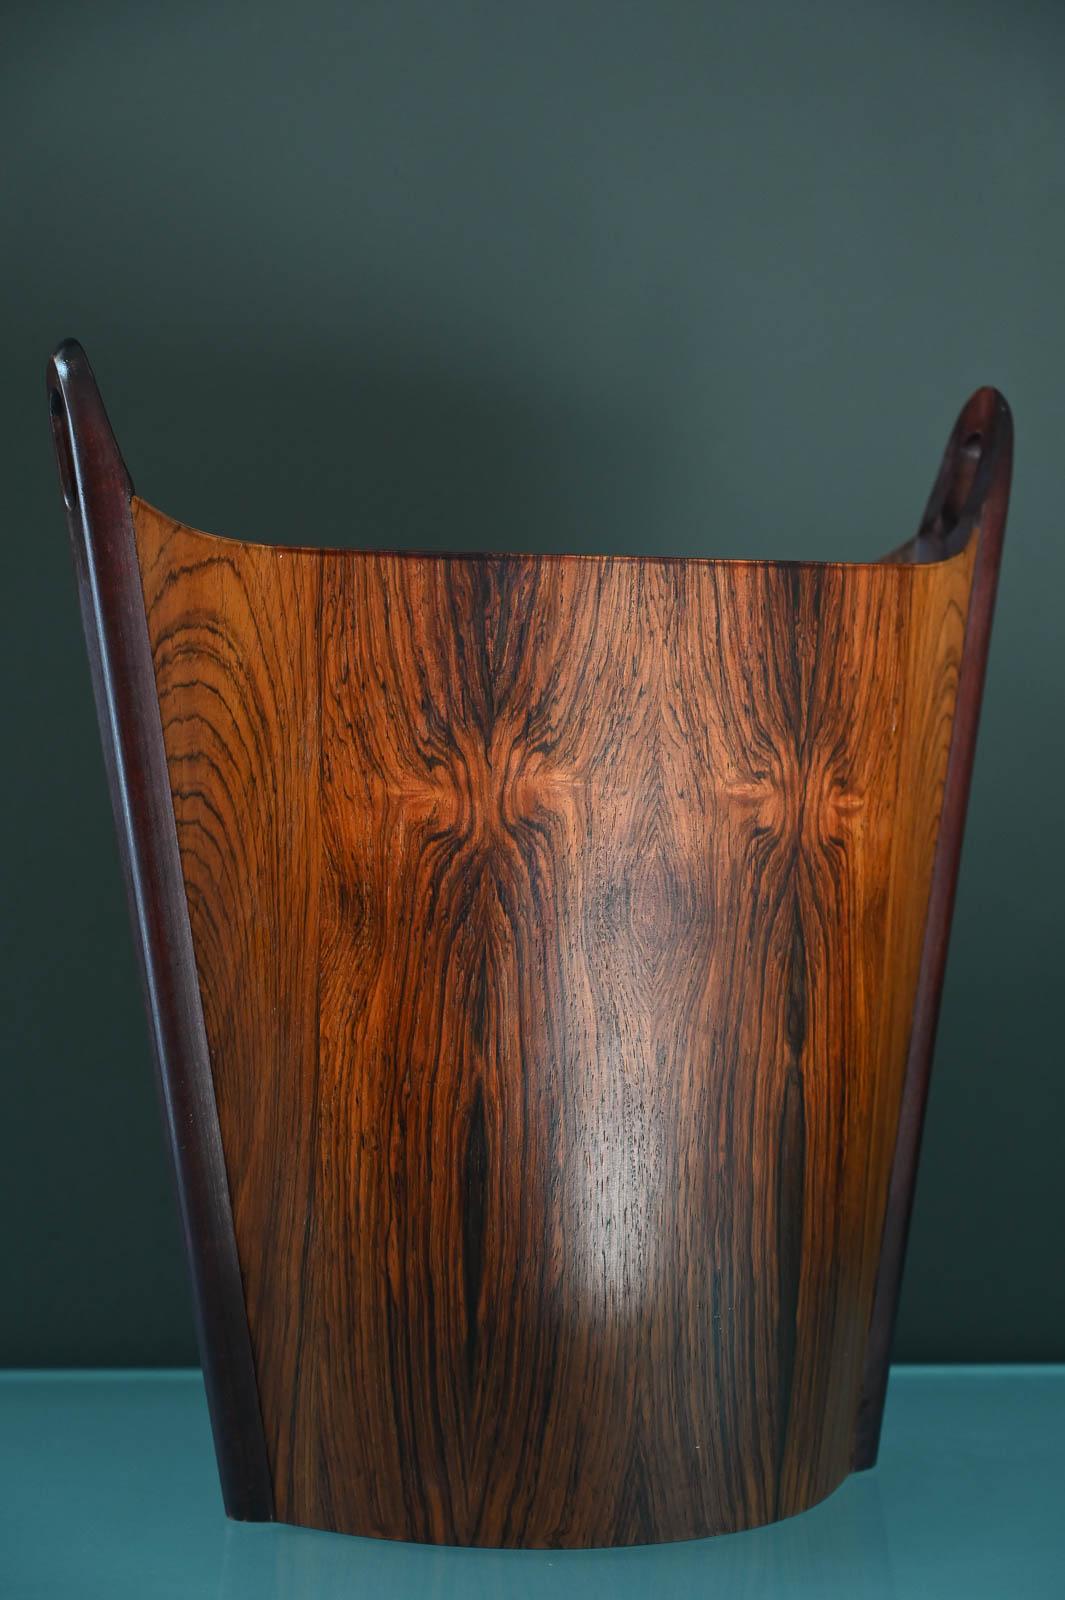 Rosewood Wastebasket by Eniar Barnes for P.S. Heggen Norway, ca. 1960.  Beautiful figured rosewood in very good original condition with no chips or peeling of the veneer.  Marked on inside.

Measures 17